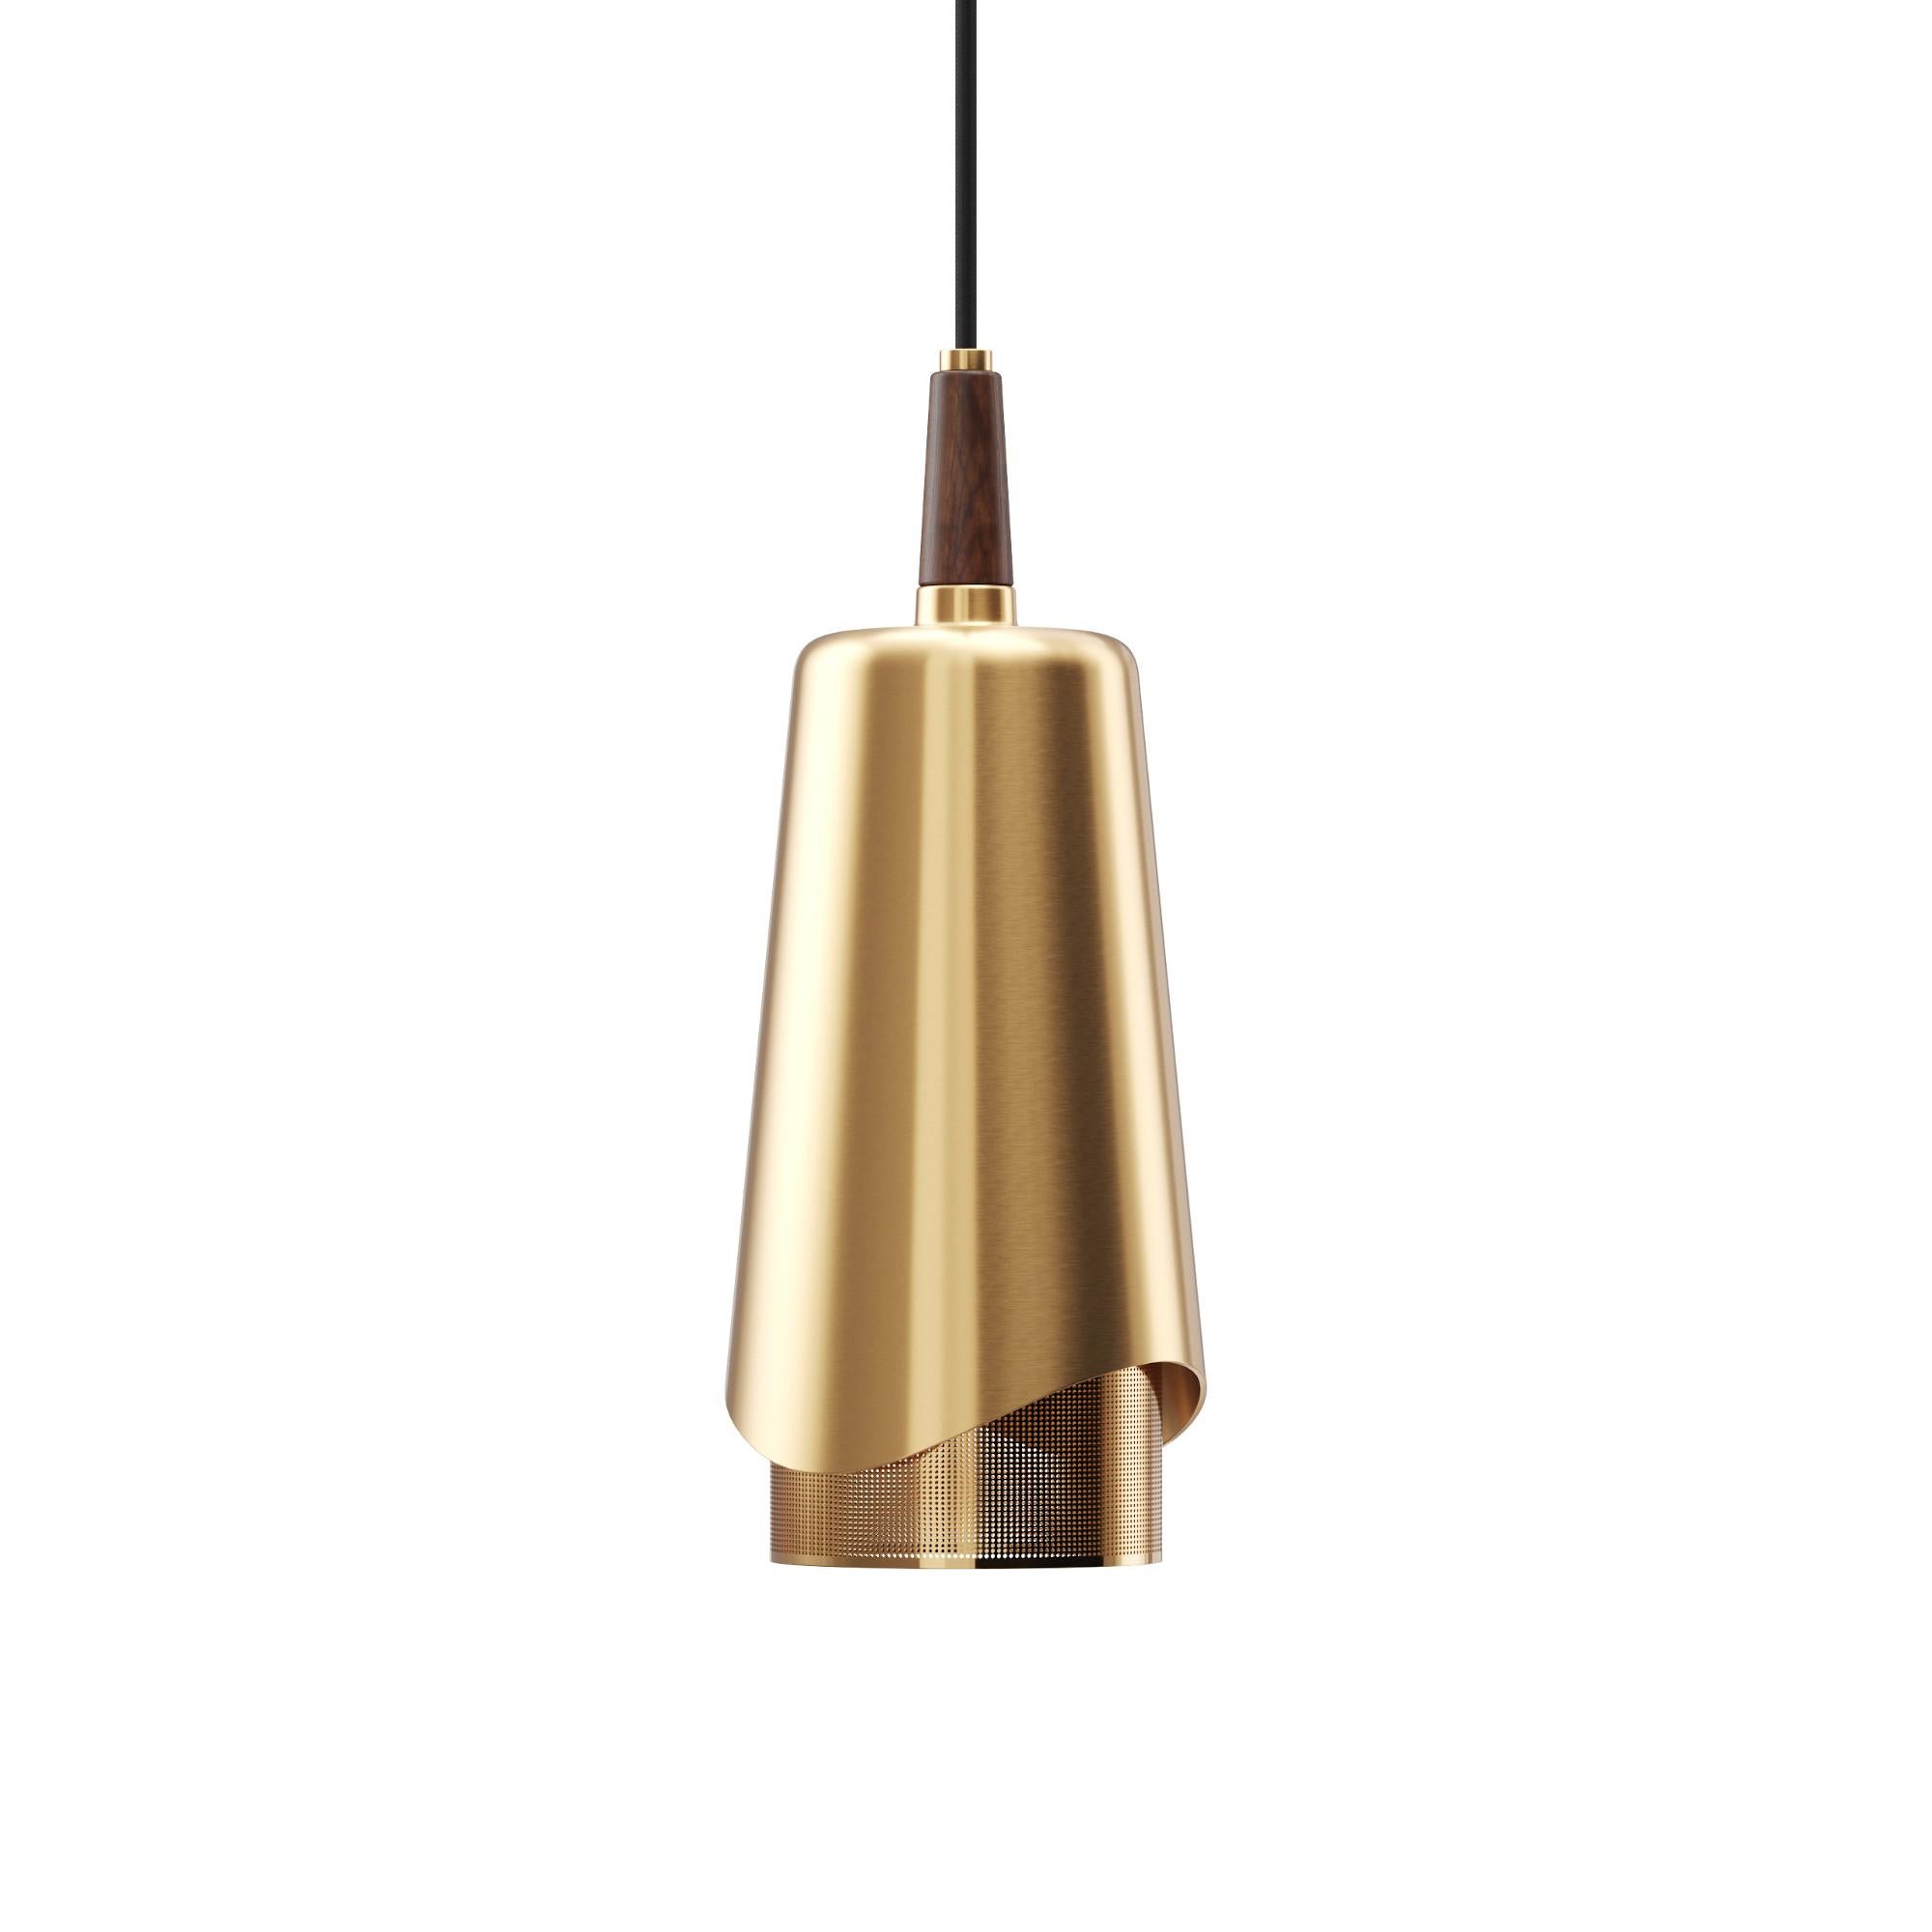 Designed by Arthur Umanoff, this eponymous pendant light shines a light on the contrasts created when perfectly symmetrical, geometric brass and walnut wood components meet. The suspended design emits downward light to illuminate surfaces with its